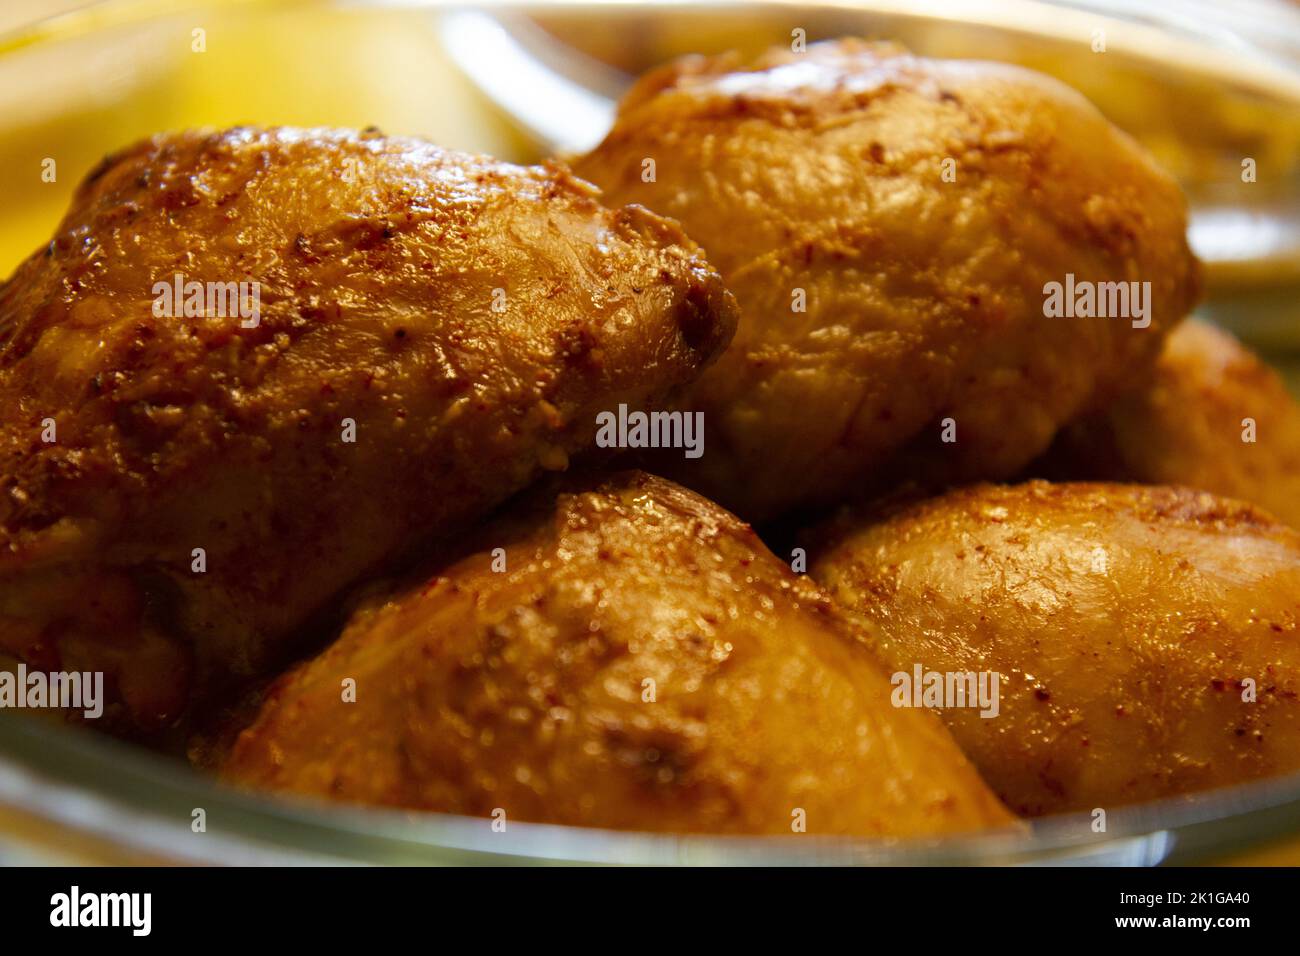 Fried appetizing pieces of chicken meat close-up. Stock Photo